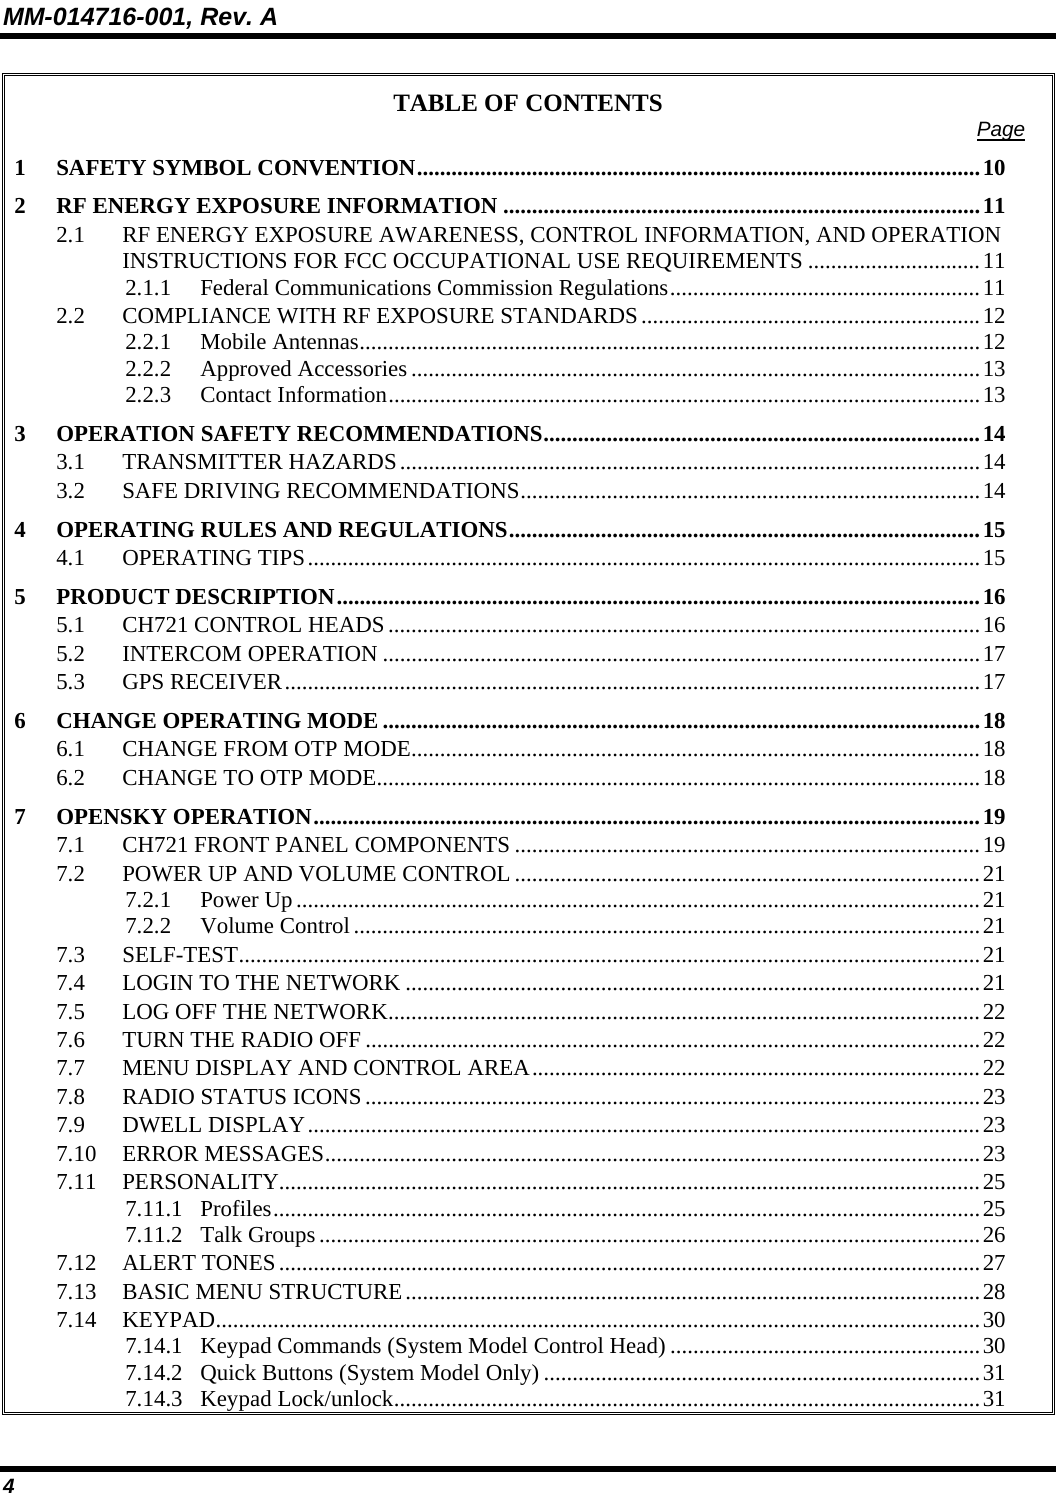 MM-014716-001, Rev. A 4 TABLE OF CONTENTS  Page 1 SAFETY SYMBOL CONVENTION..................................................................................................10 2 RF ENERGY EXPOSURE INFORMATION ...................................................................................11 2.1 RF ENERGY EXPOSURE AWARENESS, CONTROL INFORMATION, AND OPERATION INSTRUCTIONS FOR FCC OCCUPATIONAL USE REQUIREMENTS ..............................11 2.1.1 Federal Communications Commission Regulations......................................................11 2.2 COMPLIANCE WITH RF EXPOSURE STANDARDS...........................................................12 2.2.1 Mobile Antennas............................................................................................................12 2.2.2 Approved Accessories ...................................................................................................13 2.2.3 Contact Information.......................................................................................................13 3 OPERATION SAFETY RECOMMENDATIONS............................................................................14 3.1 TRANSMITTER HAZARDS.....................................................................................................14 3.2 SAFE DRIVING RECOMMENDATIONS................................................................................14 4 OPERATING RULES AND REGULATIONS..................................................................................15 4.1 OPERATING TIPS.....................................................................................................................15 5 PRODUCT DESCRIPTION................................................................................................................16 5.1 CH721 CONTROL HEADS.......................................................................................................16 5.2 INTERCOM OPERATION ........................................................................................................17 5.3 GPS RECEIVER.........................................................................................................................17 6 CHANGE OPERATING MODE ........................................................................................................18 6.1 CHANGE FROM OTP MODE...................................................................................................18 6.2 CHANGE TO OTP MODE.........................................................................................................18 7 OPENSKY OPERATION....................................................................................................................19 7.1 CH721 FRONT PANEL COMPONENTS .................................................................................19 7.2 POWER UP AND VOLUME CONTROL .................................................................................21 7.2.1 Power Up.......................................................................................................................21 7.2.2 Volume Control.............................................................................................................21 7.3 SELF-TEST.................................................................................................................................21 7.4 LOGIN TO THE NETWORK ....................................................................................................21 7.5 LOG OFF THE NETWORK.......................................................................................................22 7.6 TURN THE RADIO OFF ...........................................................................................................22 7.7 MENU DISPLAY AND CONTROL AREA..............................................................................22 7.8 RADIO STATUS ICONS...........................................................................................................23 7.9 DWELL DISPLAY.....................................................................................................................23 7.10 ERROR MESSAGES..................................................................................................................23 7.11 PERSONALITY..........................................................................................................................25 7.11.1 Profiles...........................................................................................................................25 7.11.2 Talk Groups...................................................................................................................26 7.12 ALERT TONES..........................................................................................................................27 7.13 BASIC MENU STRUCTURE....................................................................................................28 7.14 KEYPAD.....................................................................................................................................30 7.14.1 Keypad Commands (System Model Control Head) ......................................................30 7.14.2 Quick Buttons (System Model Only) ............................................................................31 7.14.3 Keypad Lock/unlock......................................................................................................31 